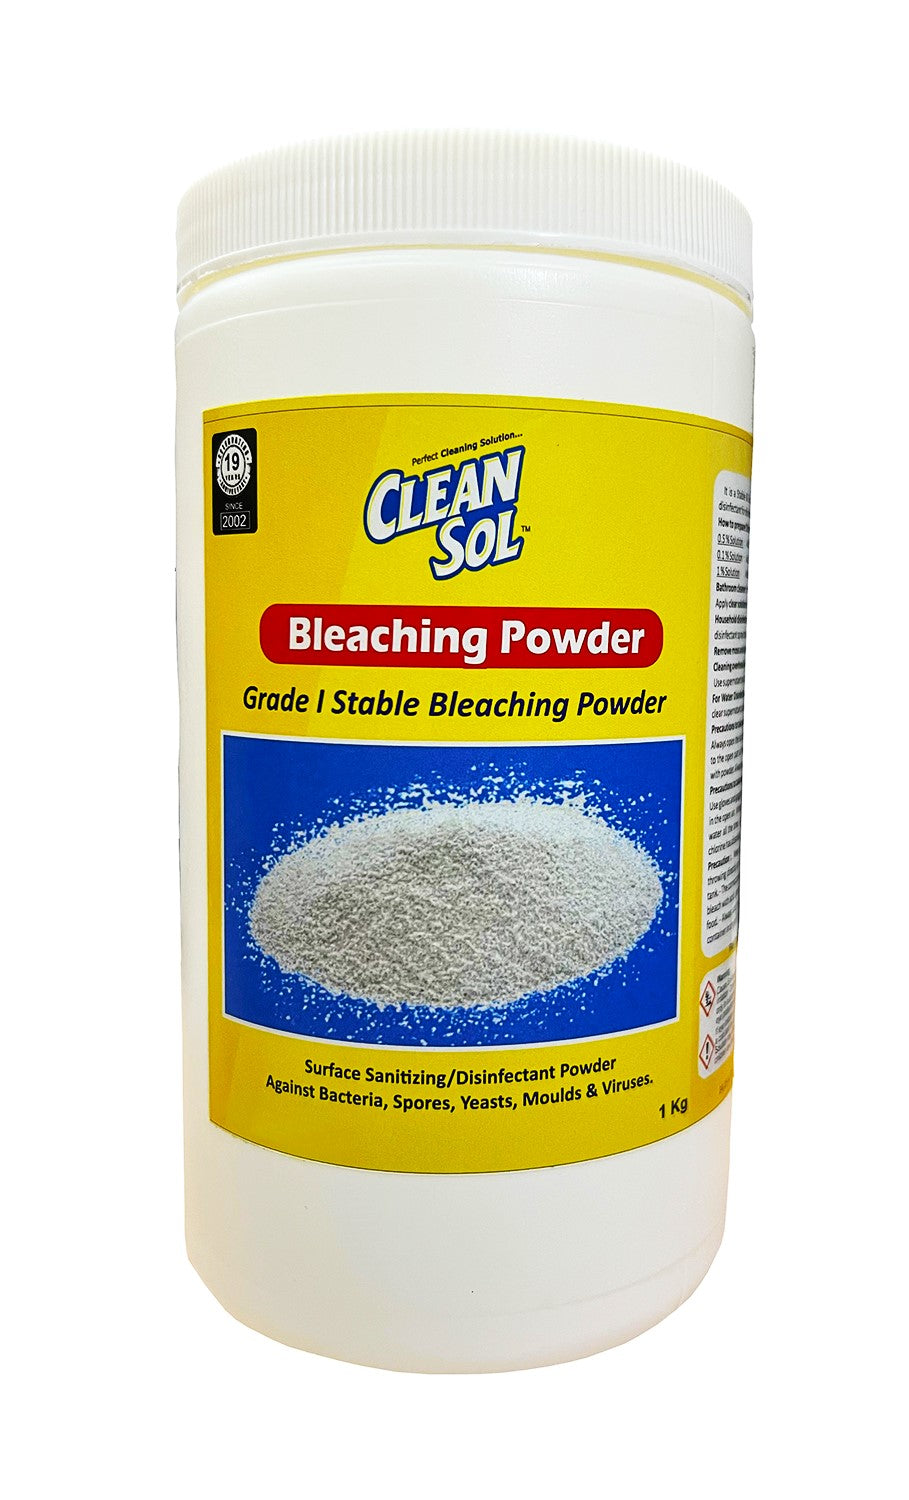 Cleansol Bleaching Powder Disinfectant